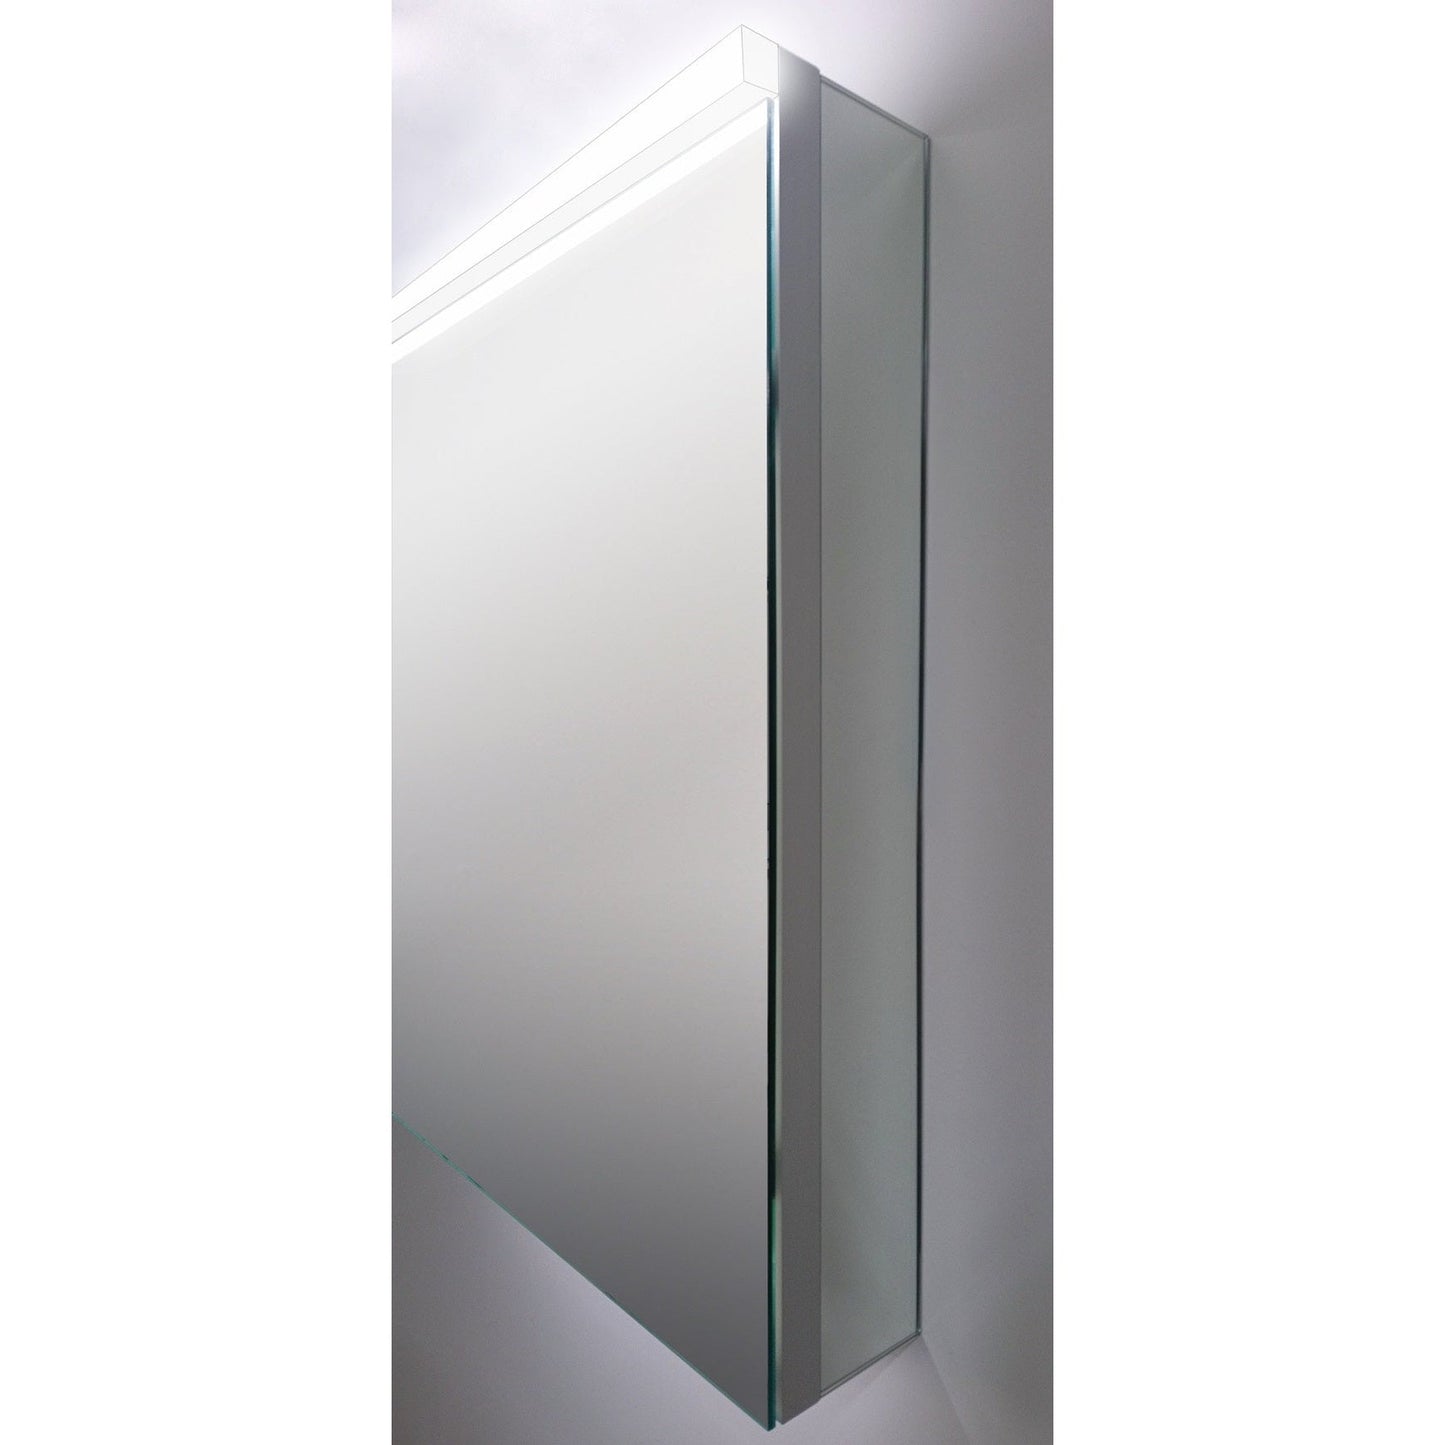 Sidler Xamo 24" x 30" 3000K Single Mirror Left Hinged Door Medicine Cabinet With Built-in GFCI outlet and Night Light Function